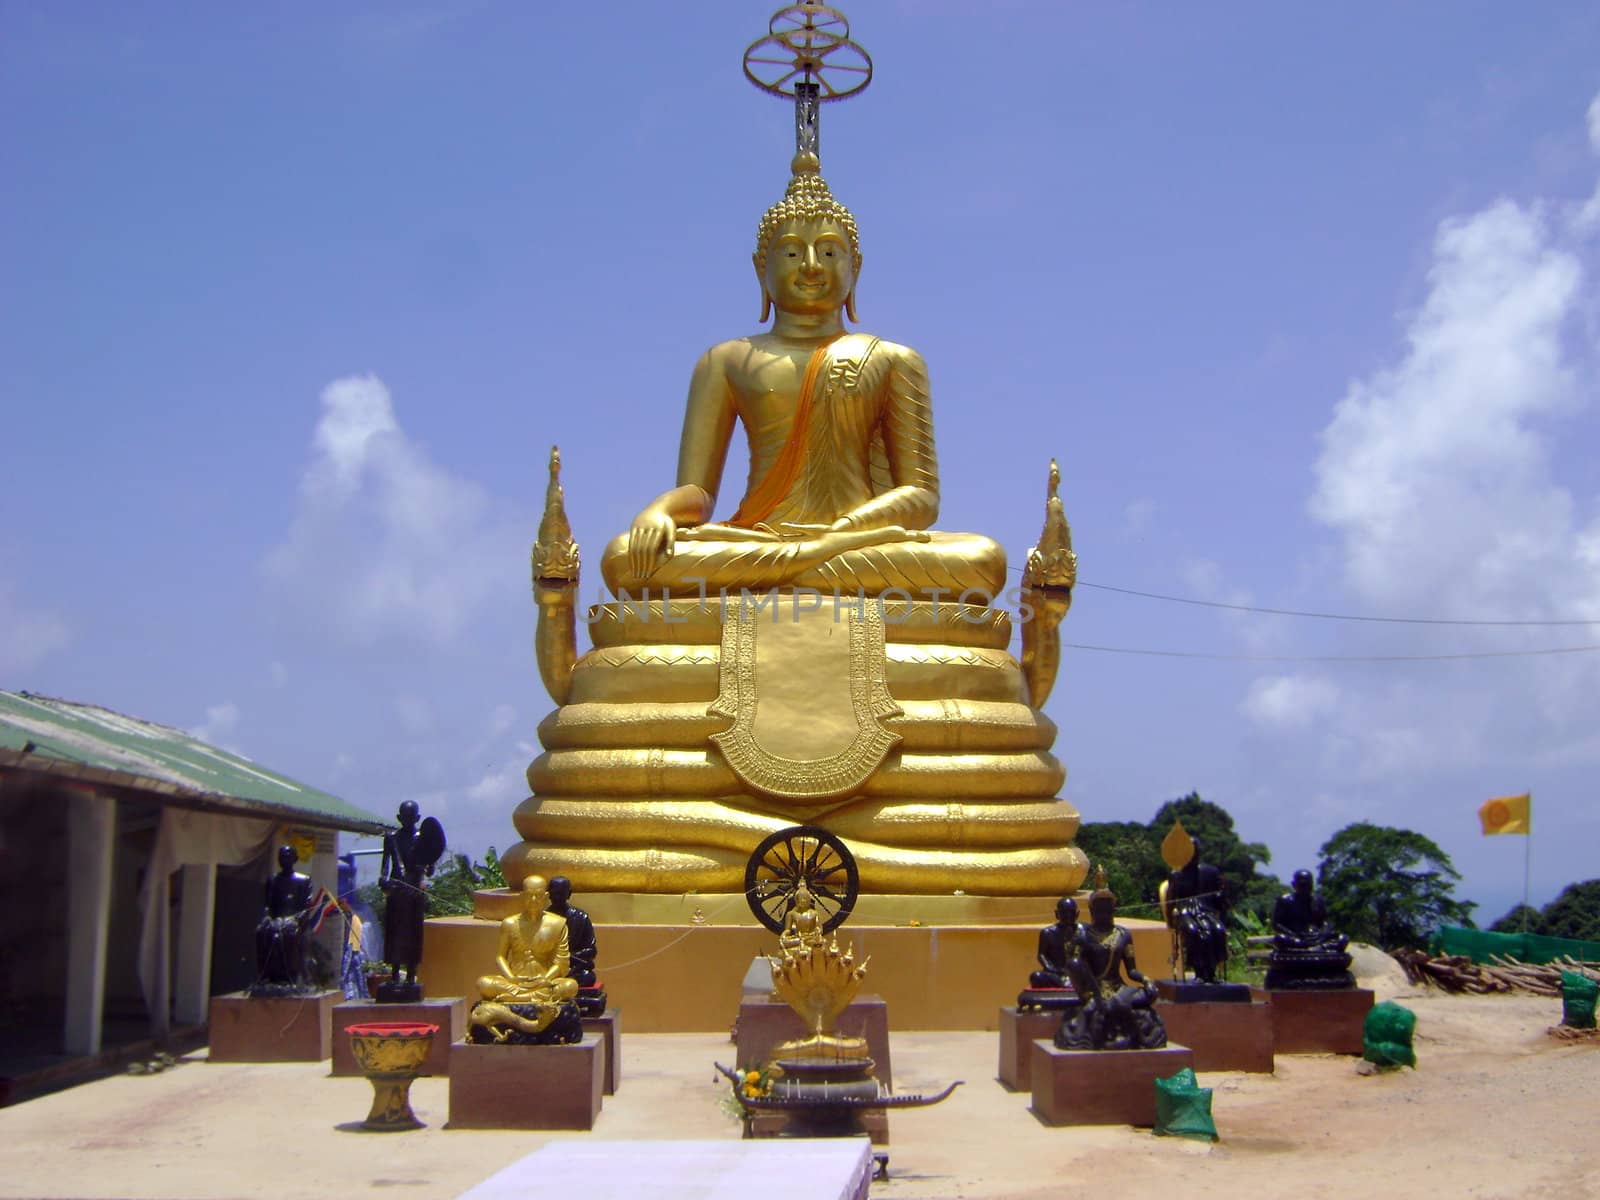 A huge golden statue of the Buddha in Thailand.